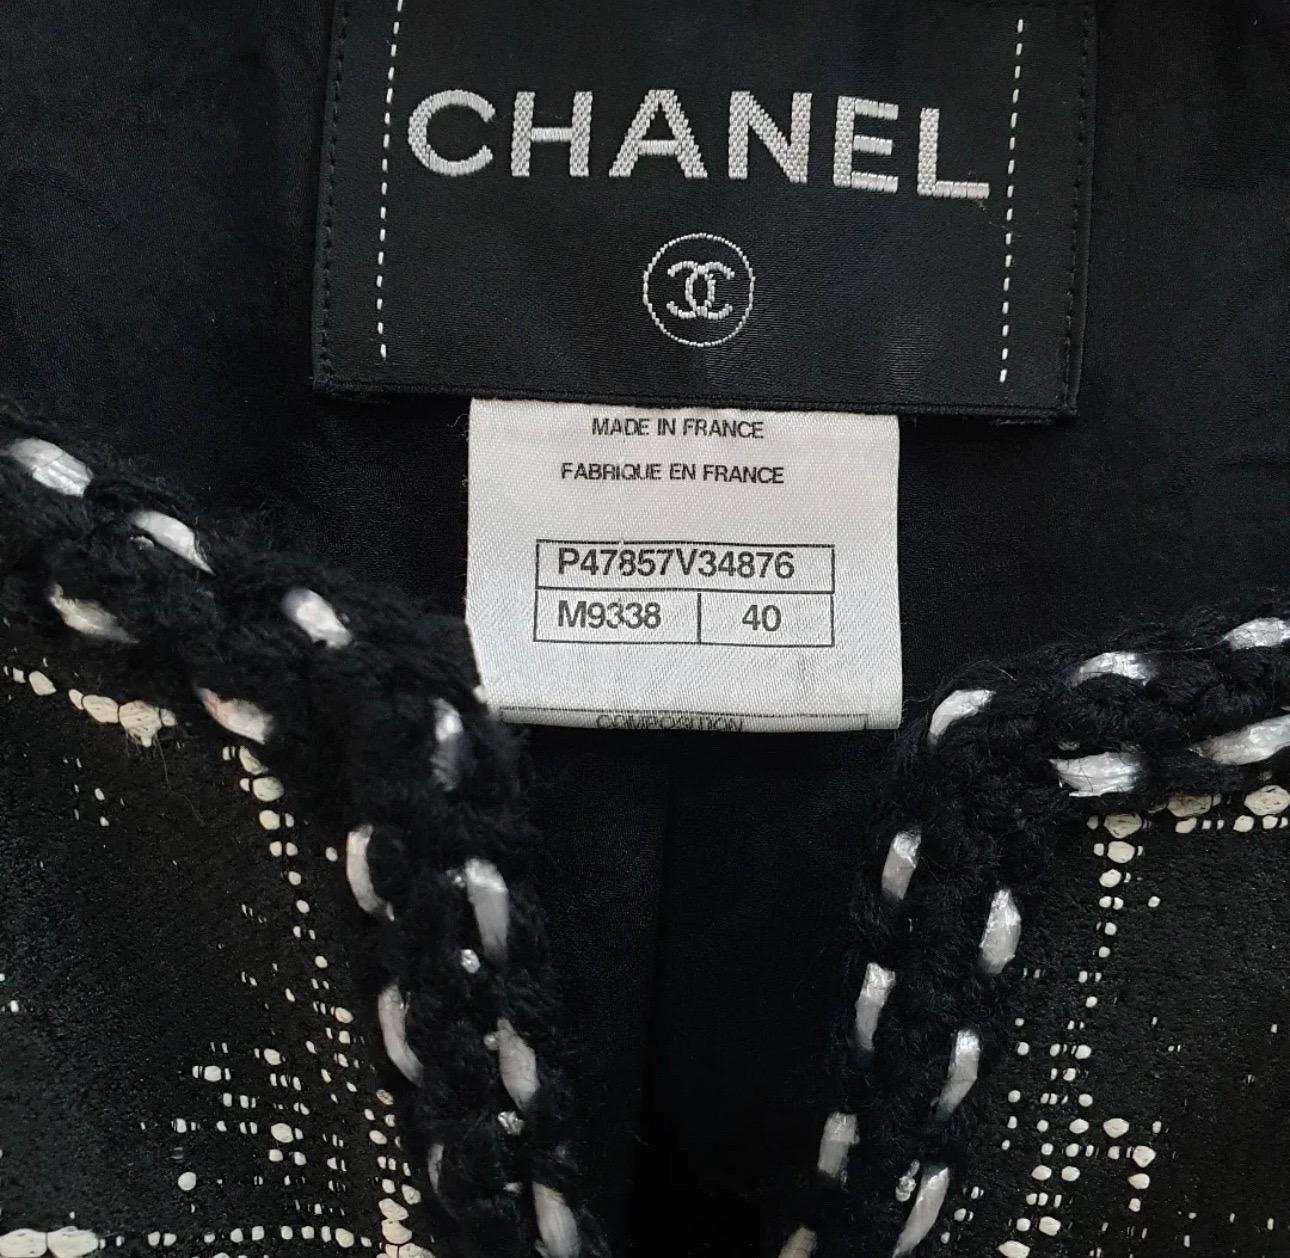 A Chanel black and white double breasted jacket from the Spring 2014 collection. The jacket has two front pockets, eight basket weave CC logo buttons down the center, four matching buttons on each sleeve and black and silver knitted trim detailing.